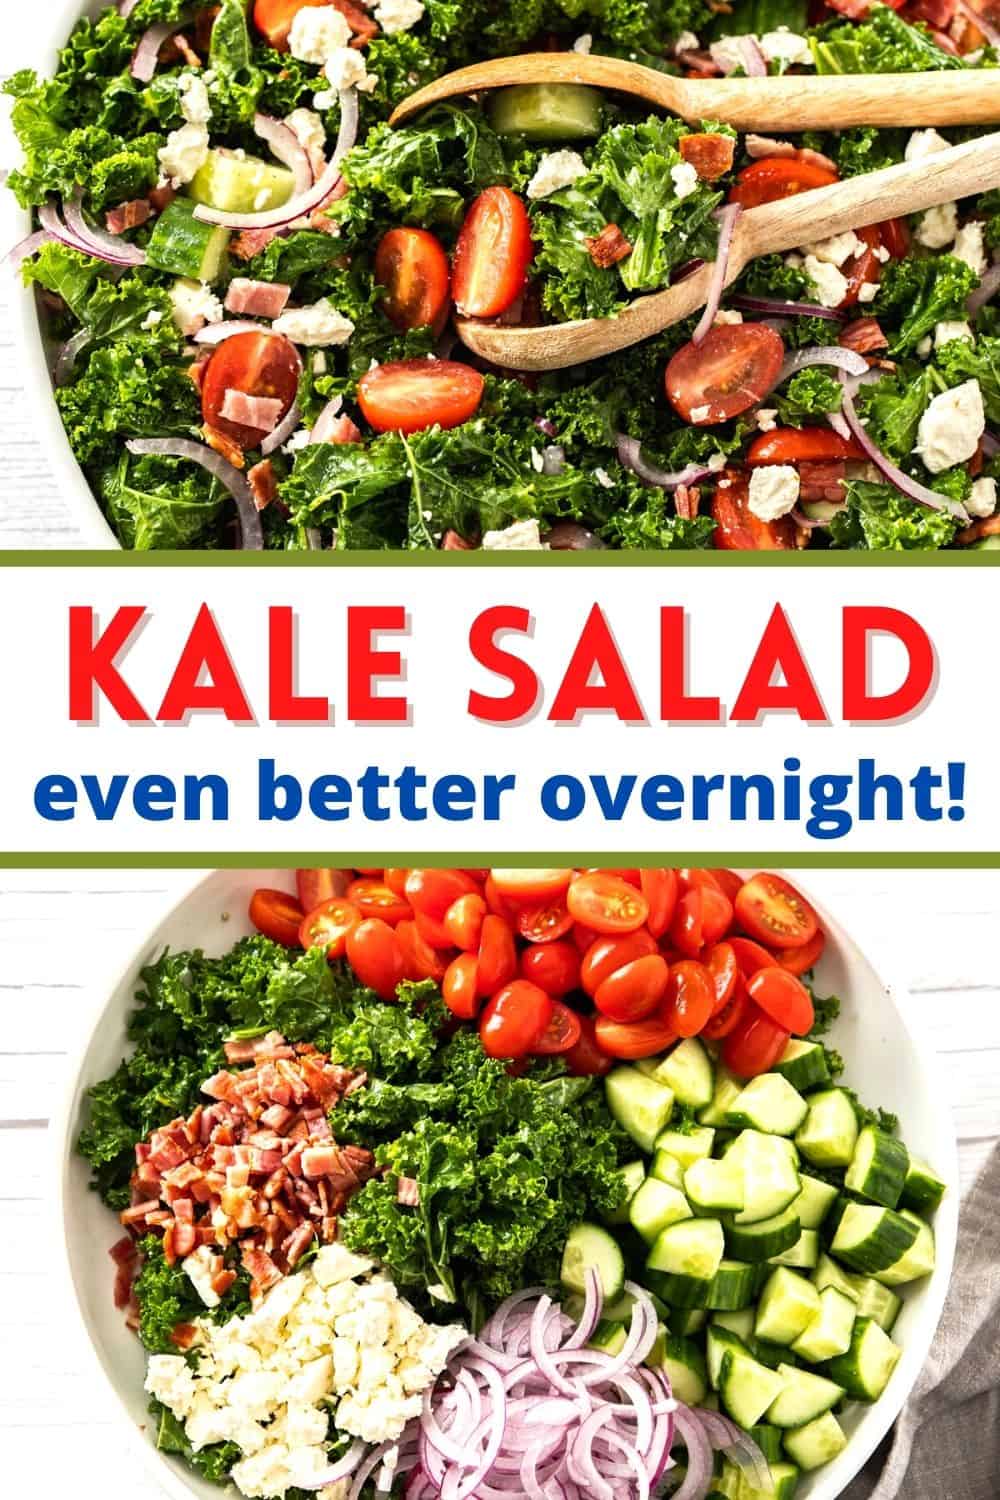 This loaded kale salad is even better after it refrigerates overnight! Serve as a side or add protein for a main dish.